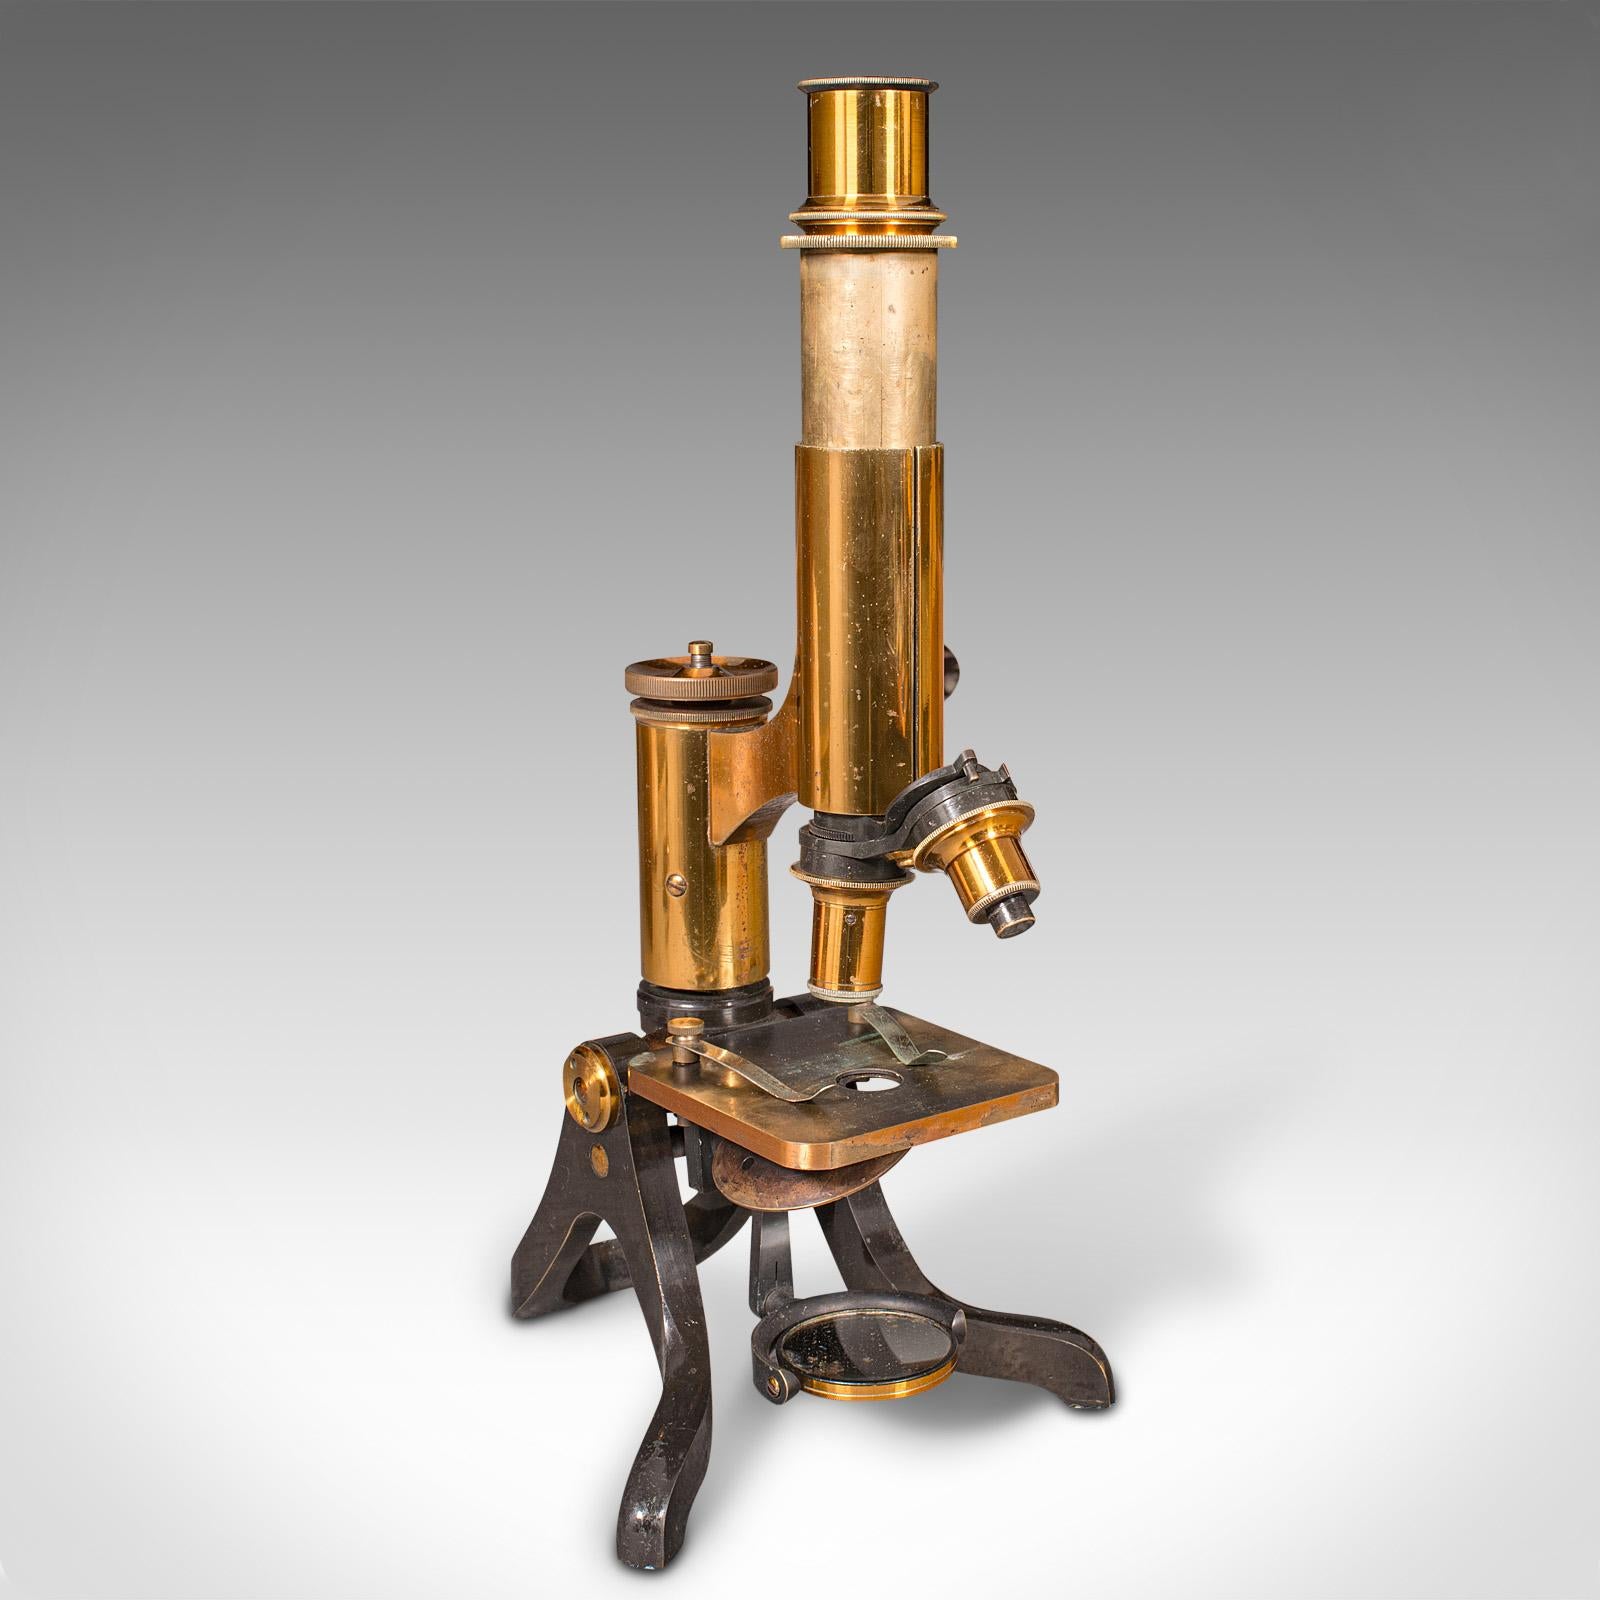 This is an antique scholar's microscope. An English, brass and enamelled metal scientific instrument by Henry Crouch, dating to the late Victorian period, circa 1900.

Appealing microscope with a quality finish and range of accessories
Displays a